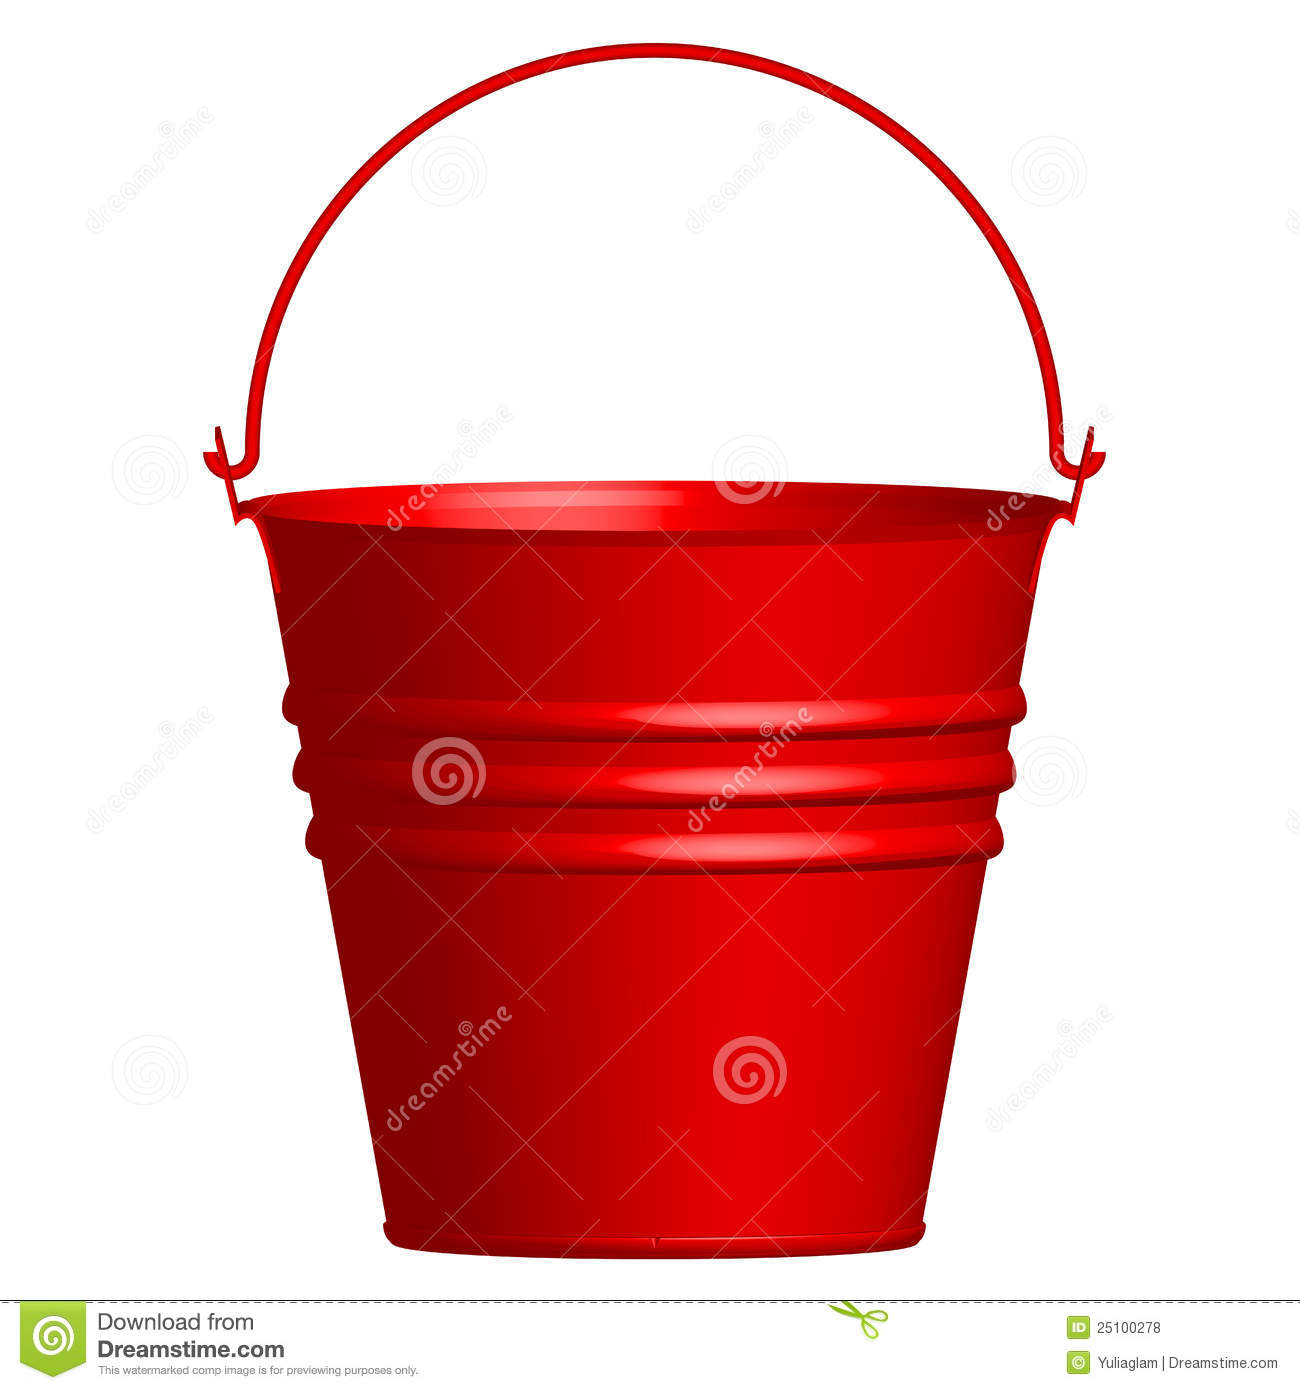 Red Bucket Royalty Free Stock Photos   Image  25100278